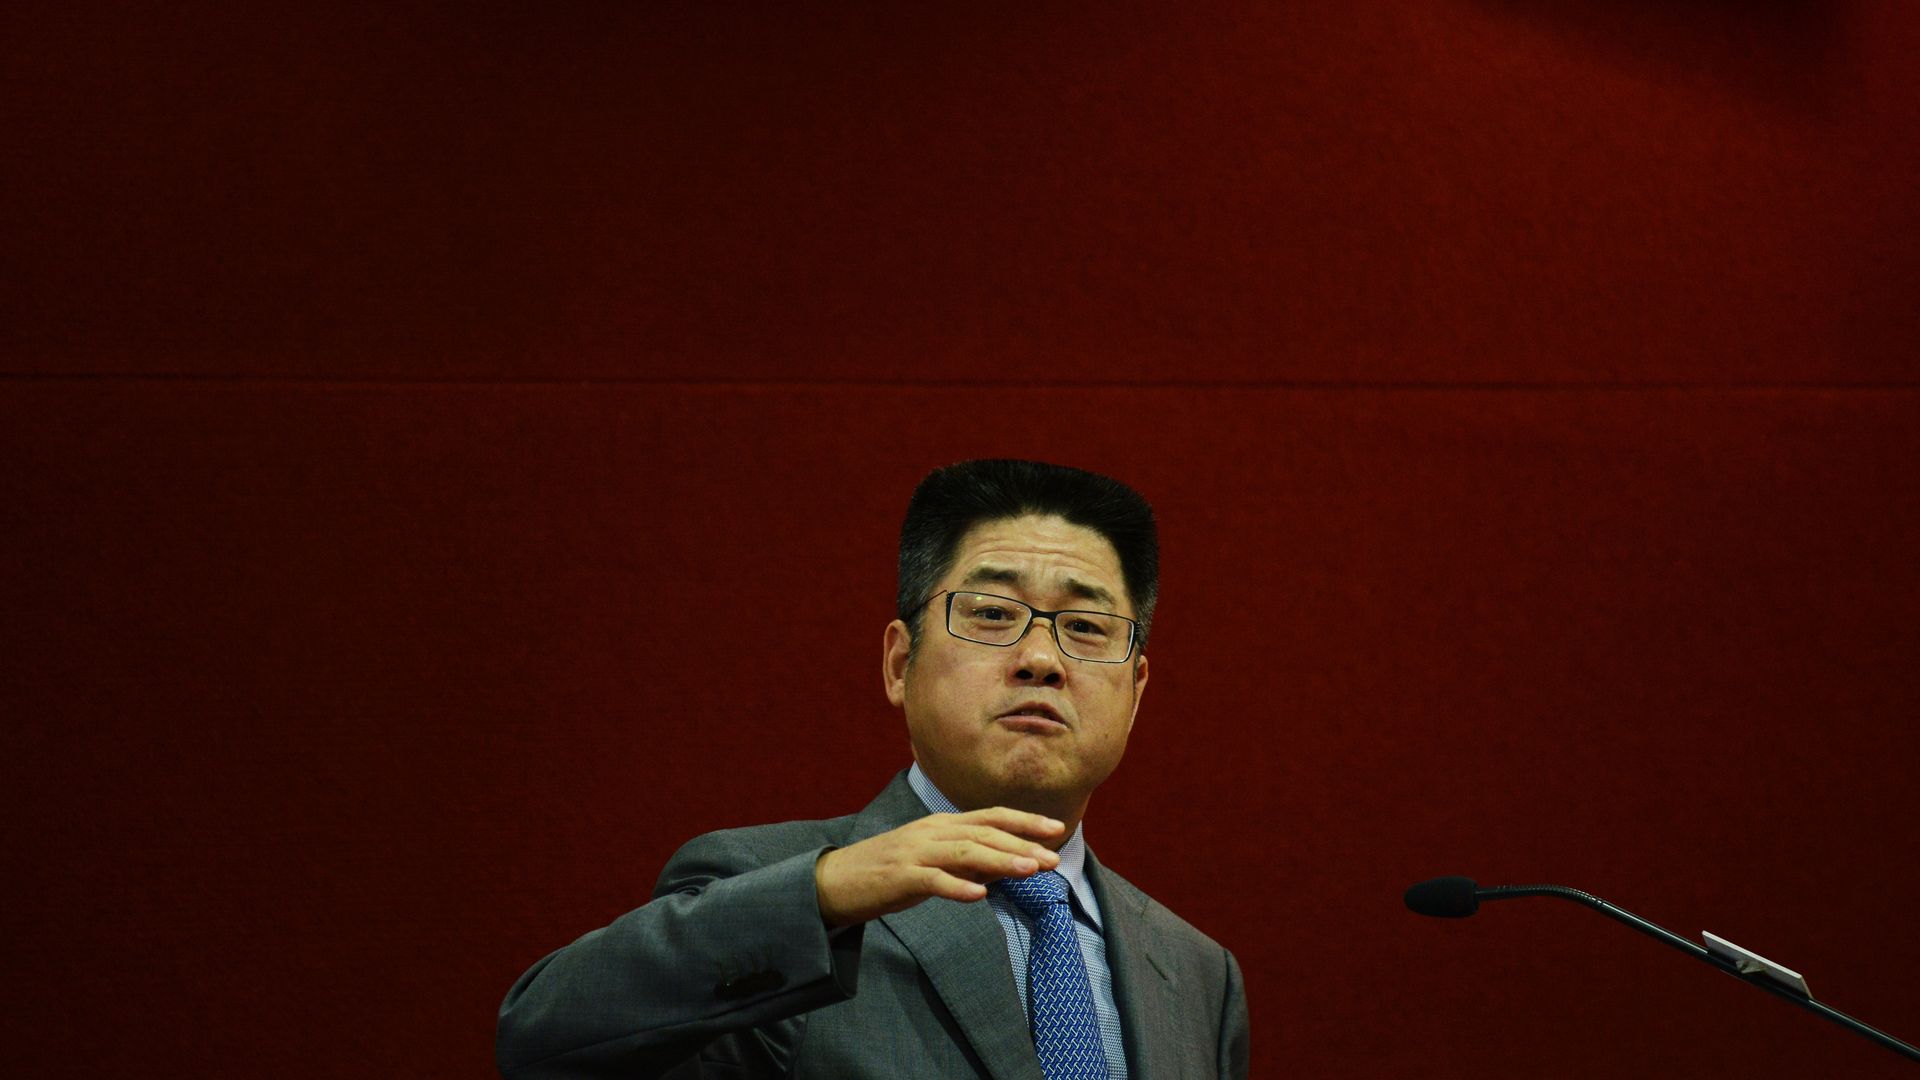 Photo of Le Yucheng speaking and gesturing